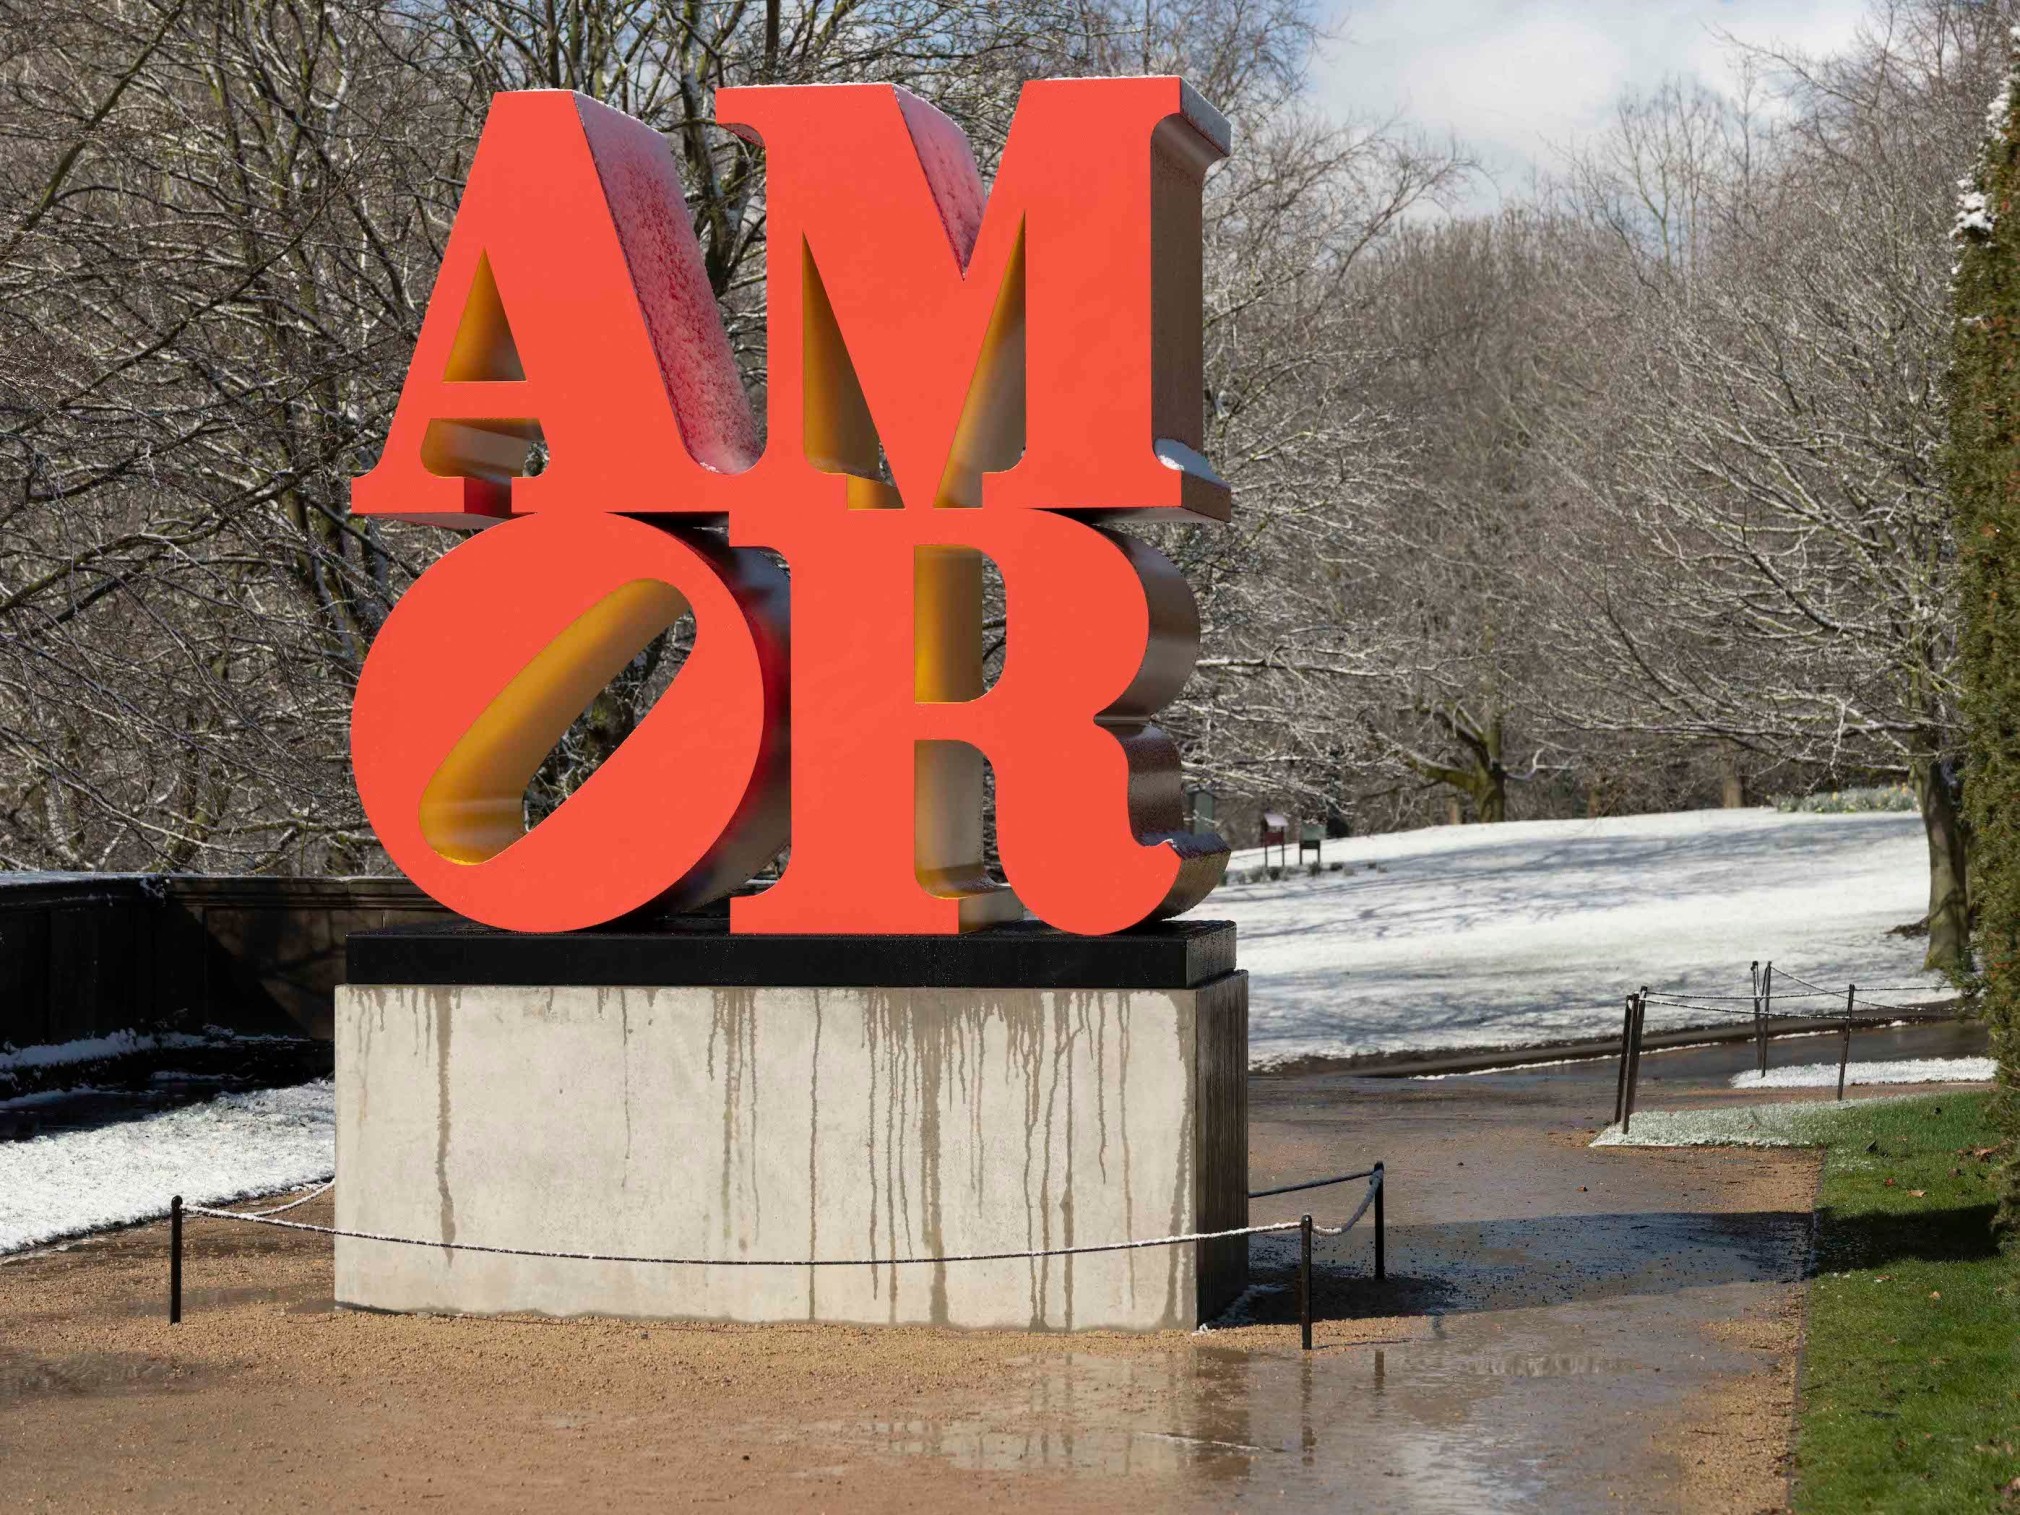 Installation view of&nbsp;AMOR (Red Yellow) (1998&ndash;2006)&nbsp;in Robert Indiana: Sculpture 1958-2018, Yorkshire Sculpture Park, Wakefield, March 12, 2022&ndash;January 8, 2023, &nbsp;